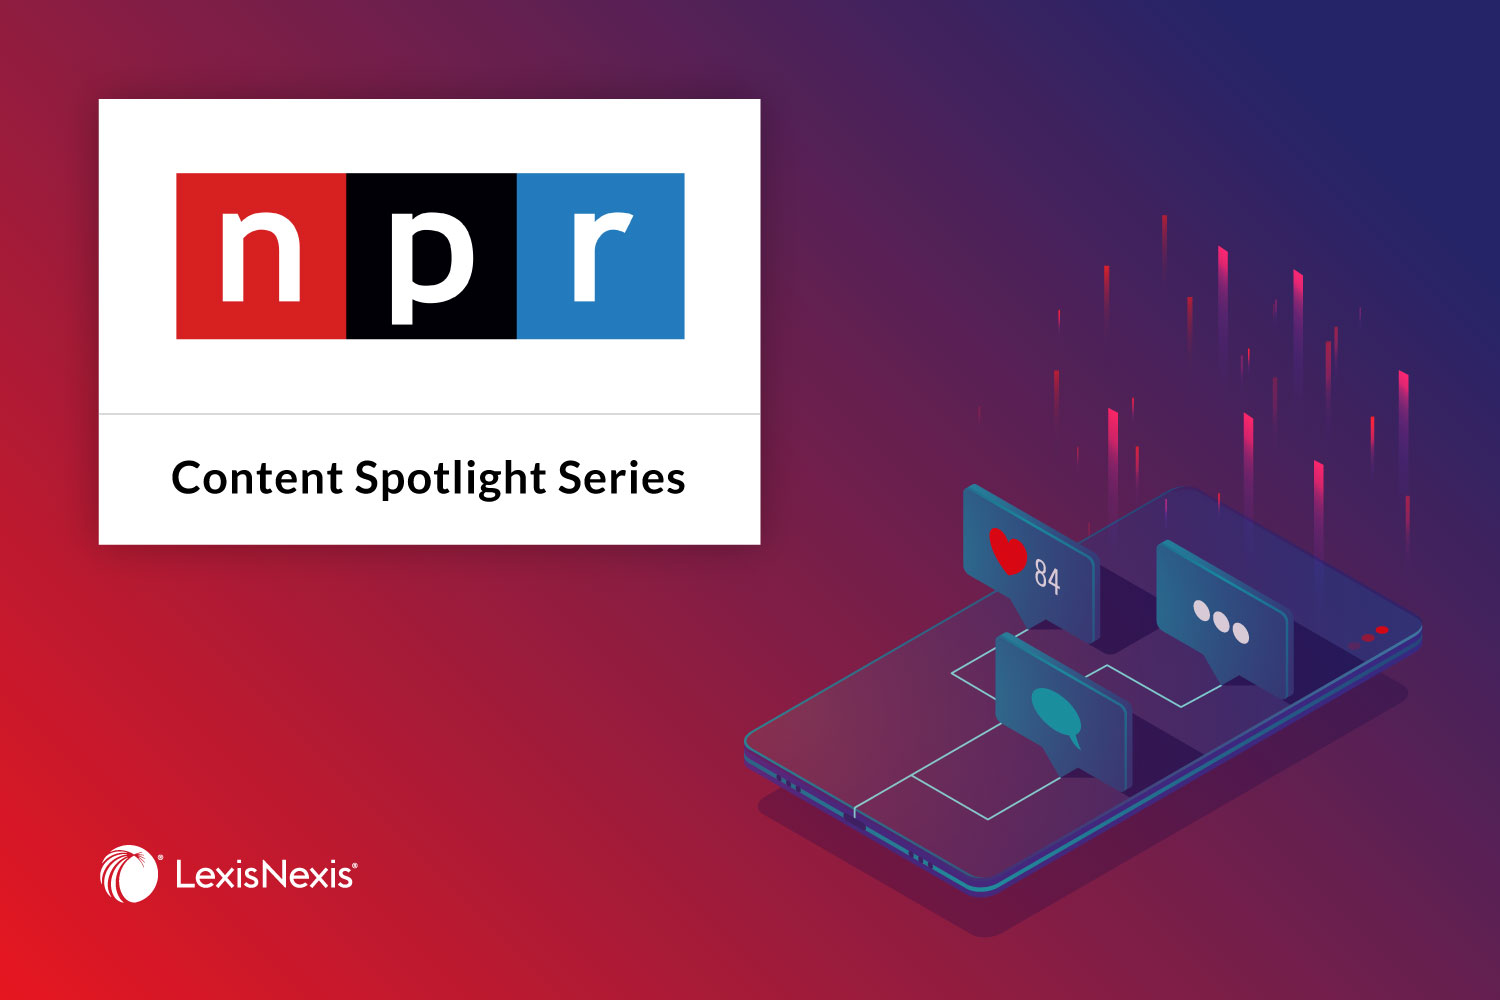 Source Spotlight: 3 Reasons to Seek Out NPR's Cutting-Edge Content available across LexisNexis® products, including Nexis® and Nexis Uni®